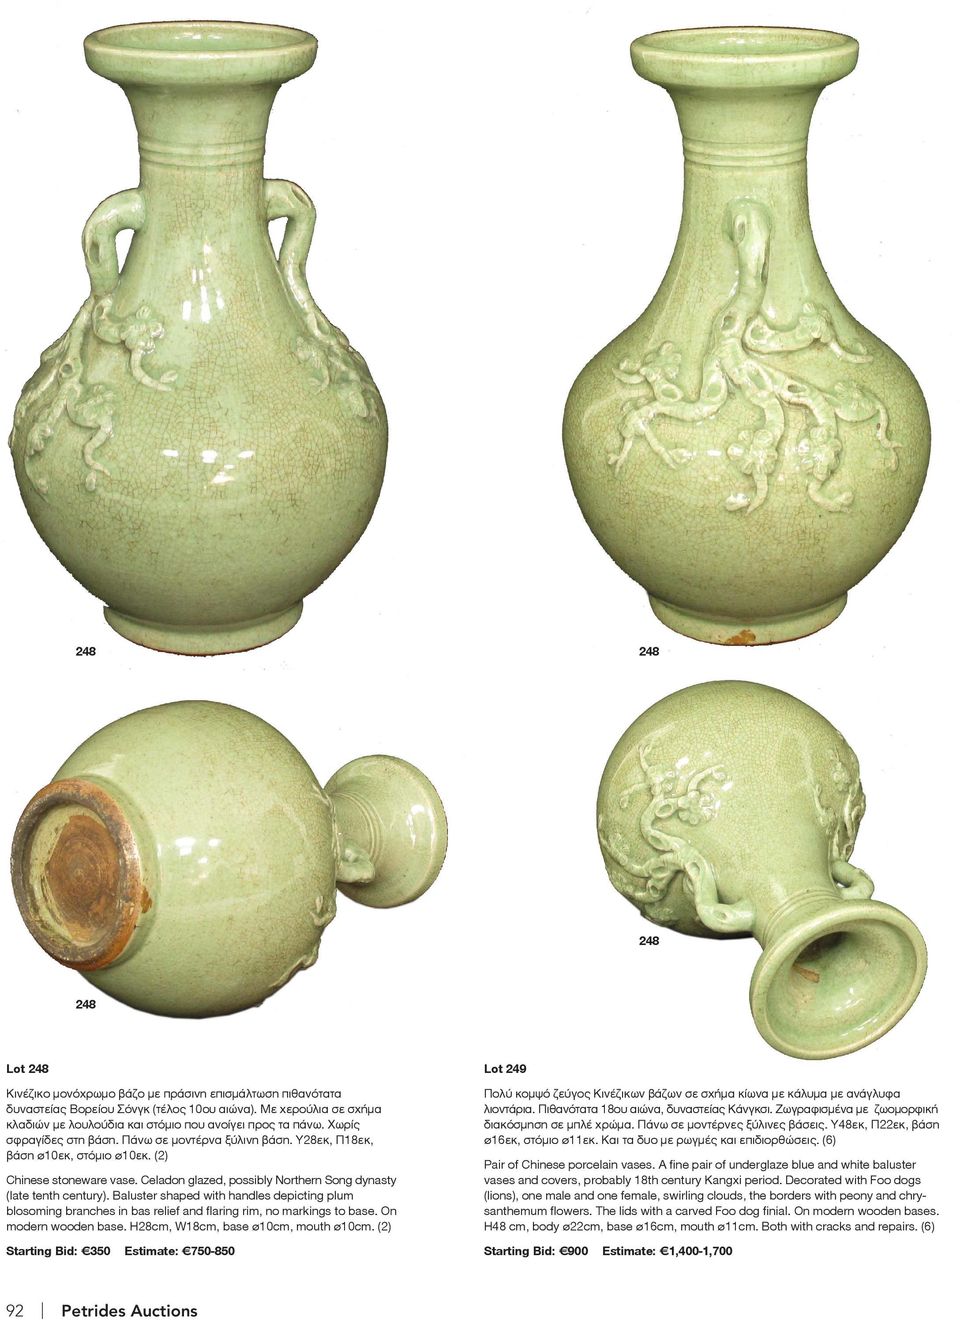 (2) Chinese stoneware vase. Celadon glazed, possibly Northern Song dynasty (late tenth century).